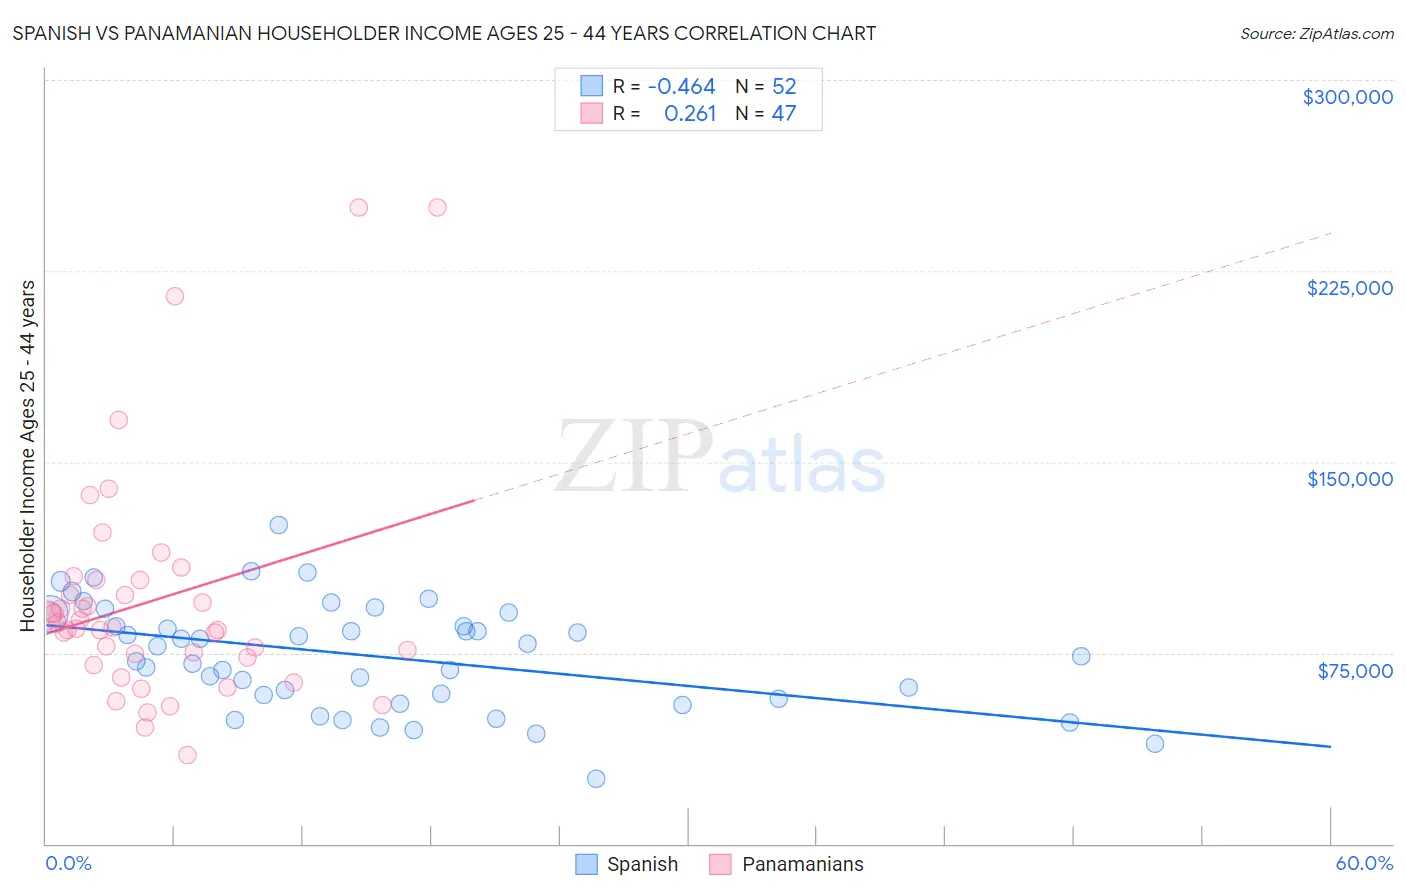 Spanish vs Panamanian Householder Income Ages 25 - 44 years